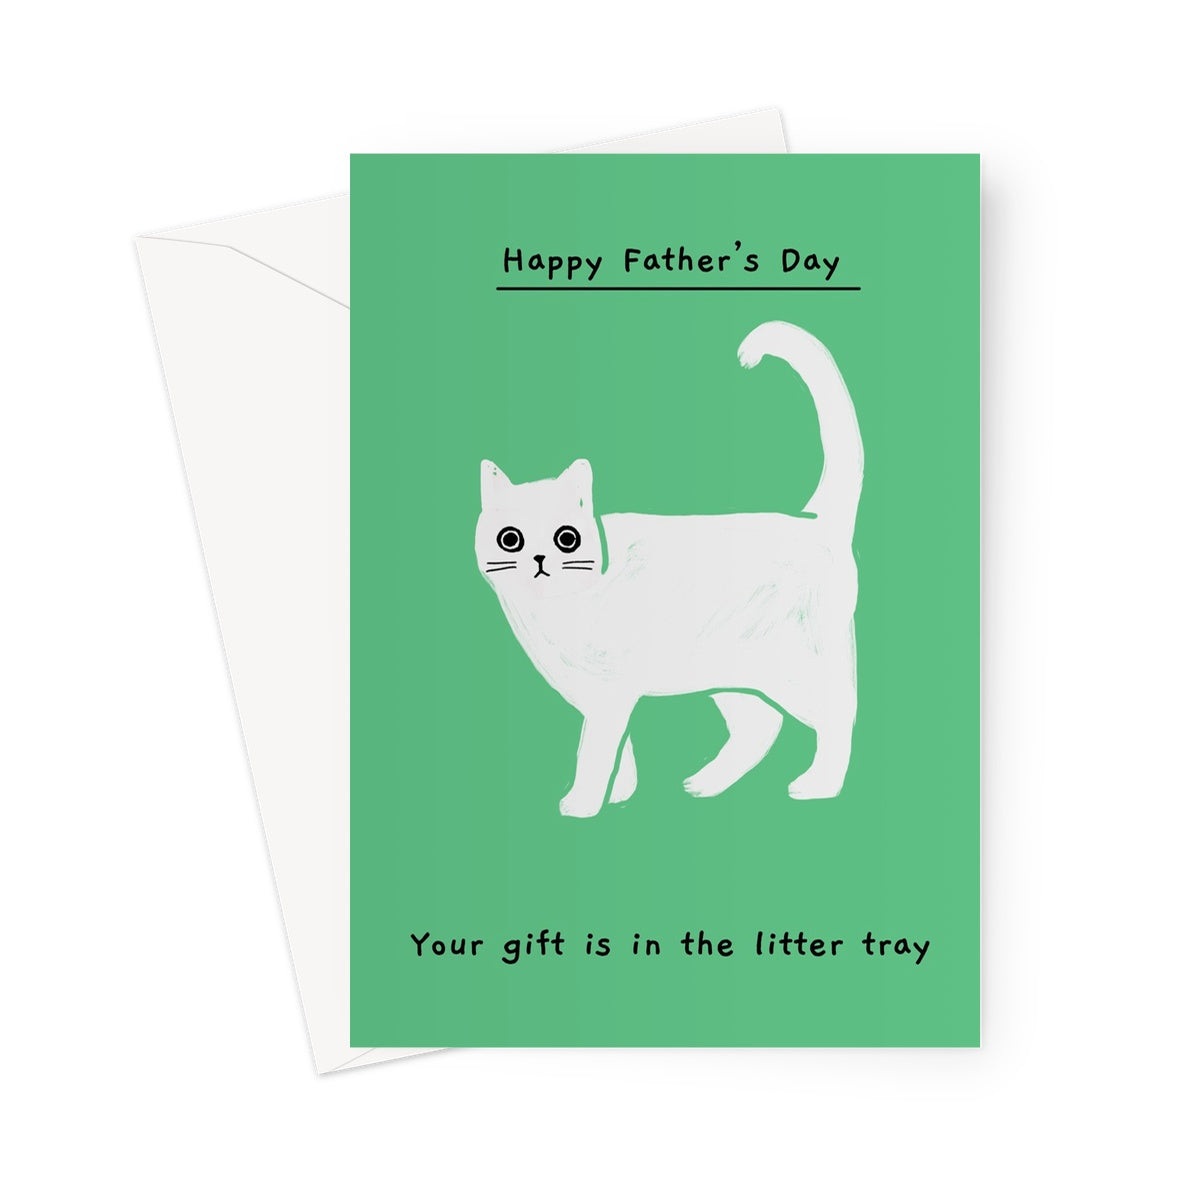 Ken the cat Father's Day card - Your gift is in the litter tray - Ken walking on green background